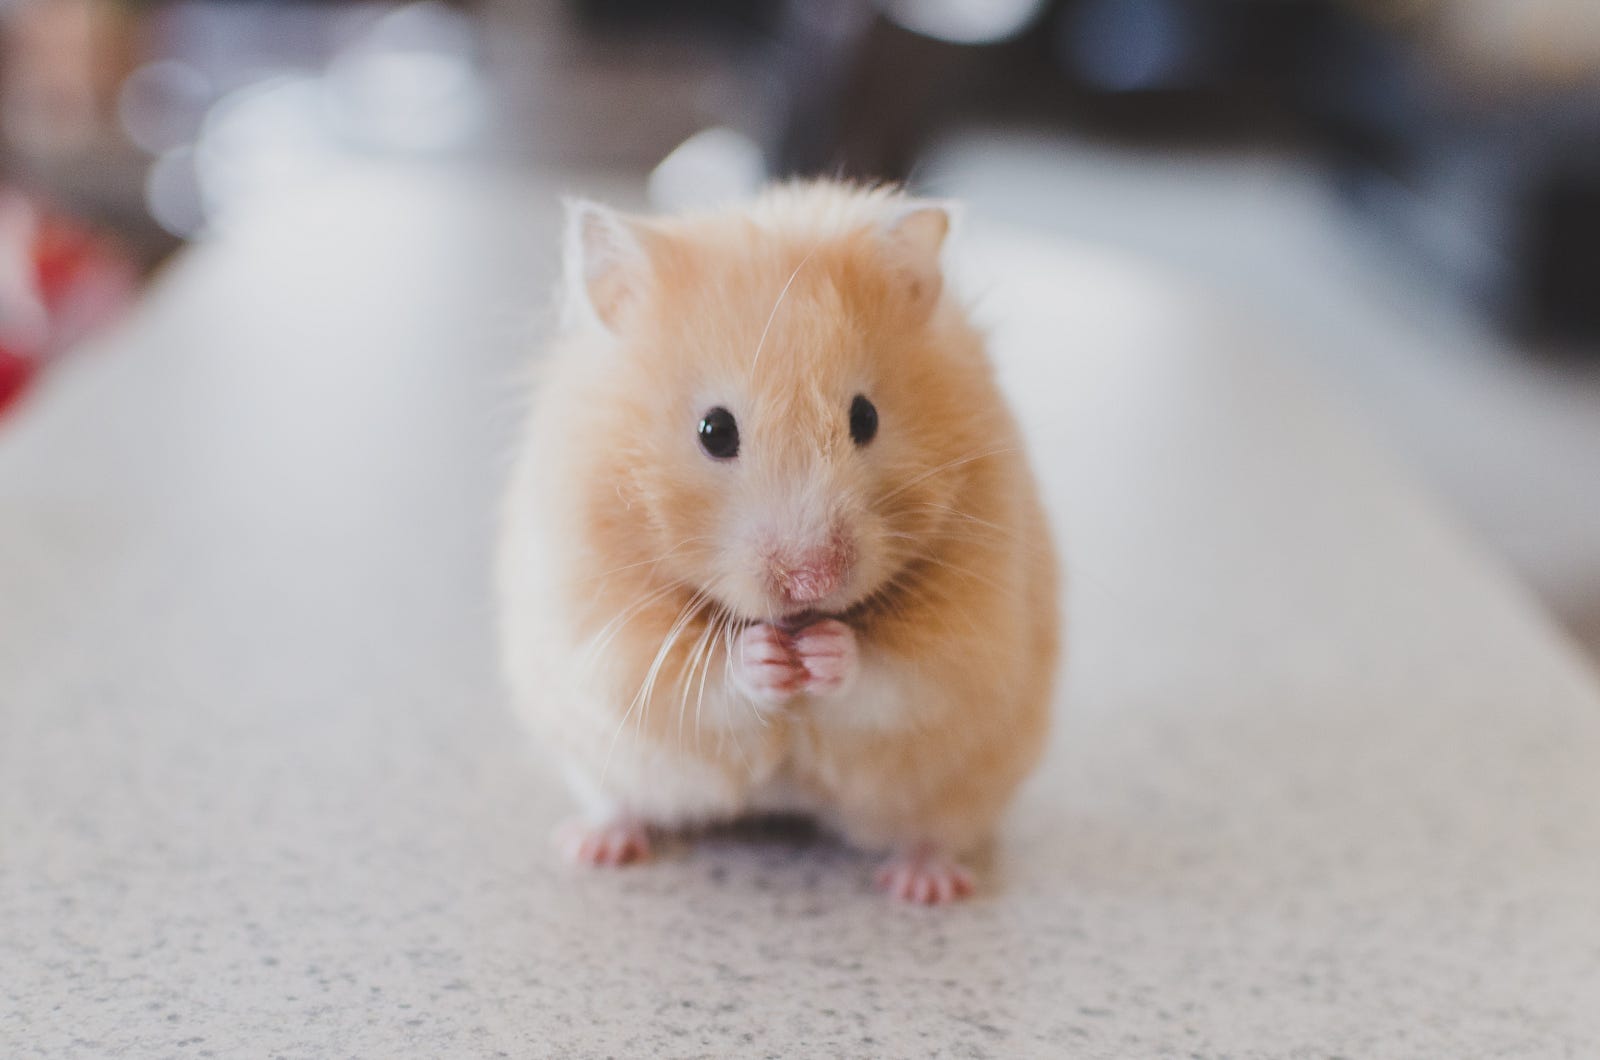 A small cute brown mouse looks at us. For the initial study phase, Juan Song, Ph.D., and colleagues used optogenetics to stimulate a brain region linked to memory in Alzheimer’s mice. This approach generated new neurons in the brains of the mice with Alzheimer’s.